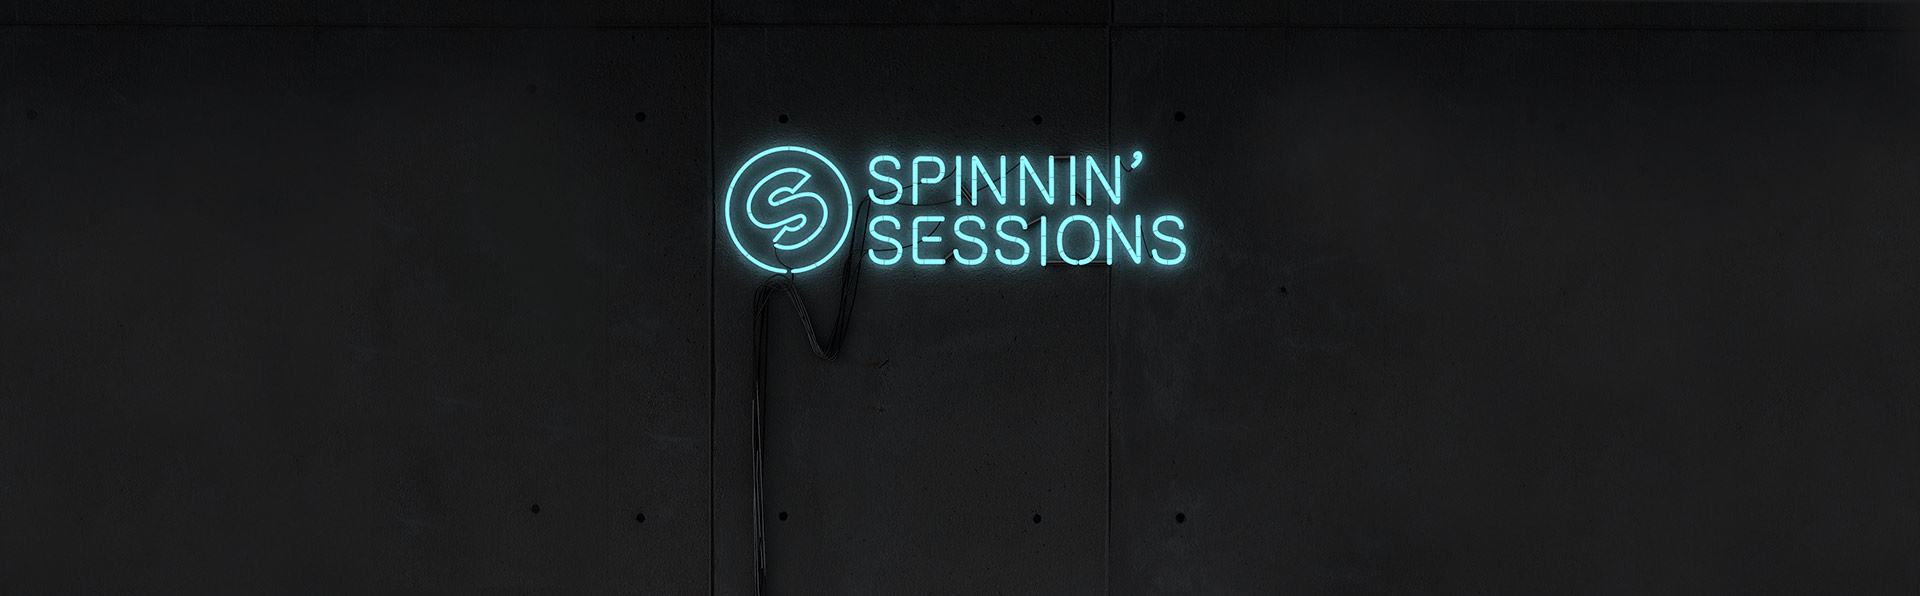 Check out Spinnin' Sessions with Snavs and a b2b mix by R3HAB & KSHMR